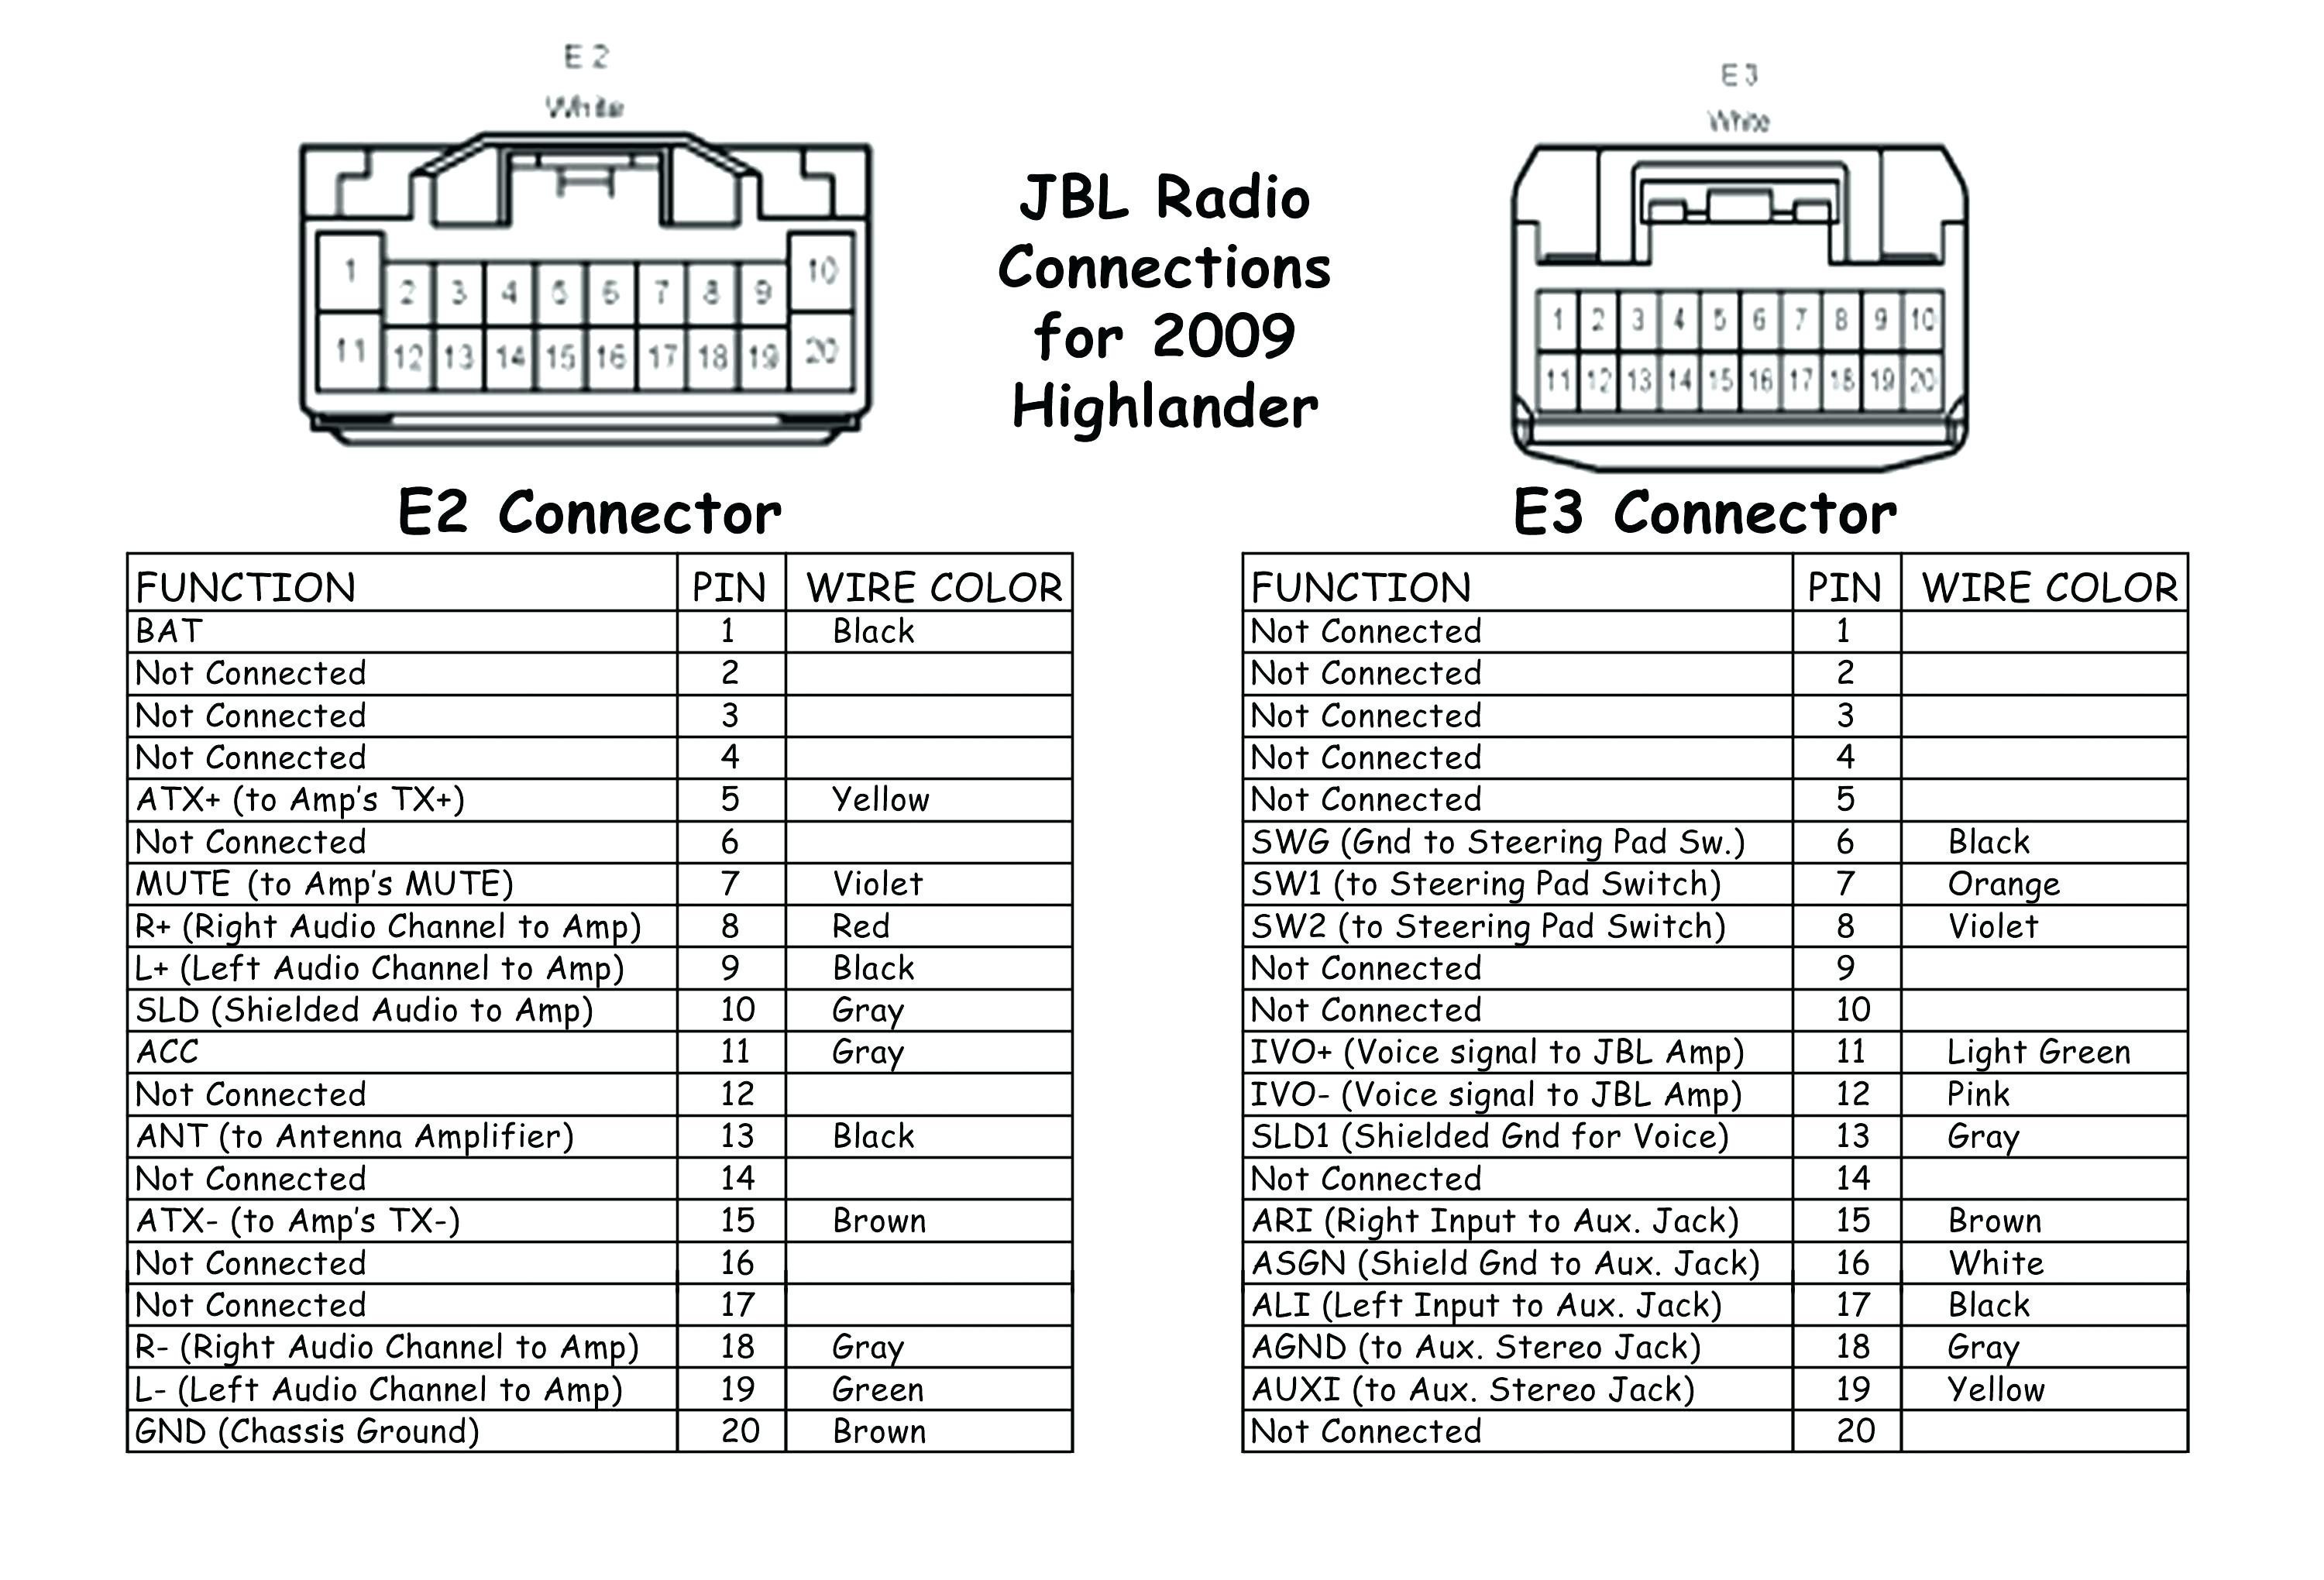 Wiring Diagram for Clarion Car Stereo Valid Clarion Wiring Diagram Car Radio Wiring Diagram Elegant